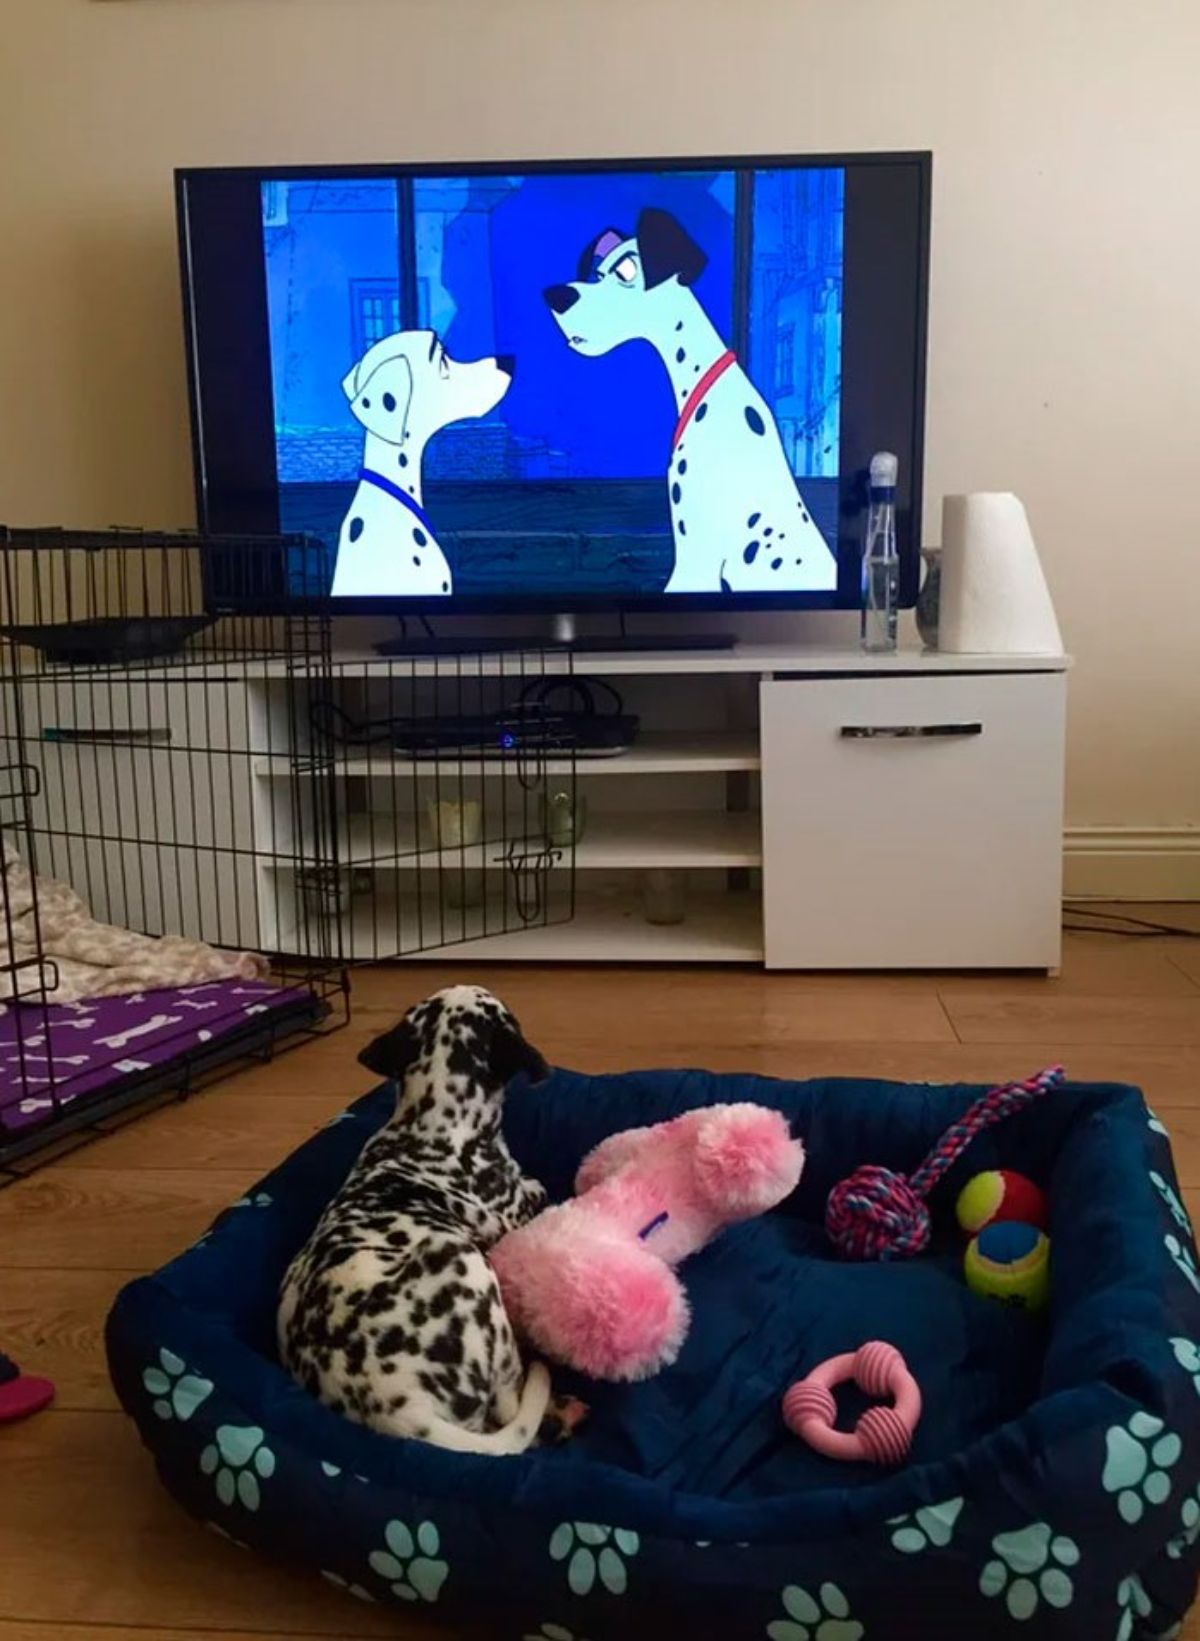 dalmation puppy laying on a blue dog bed next to a bunch of dog toys next to a dog cage watching 101 dalmations the movie on a large television